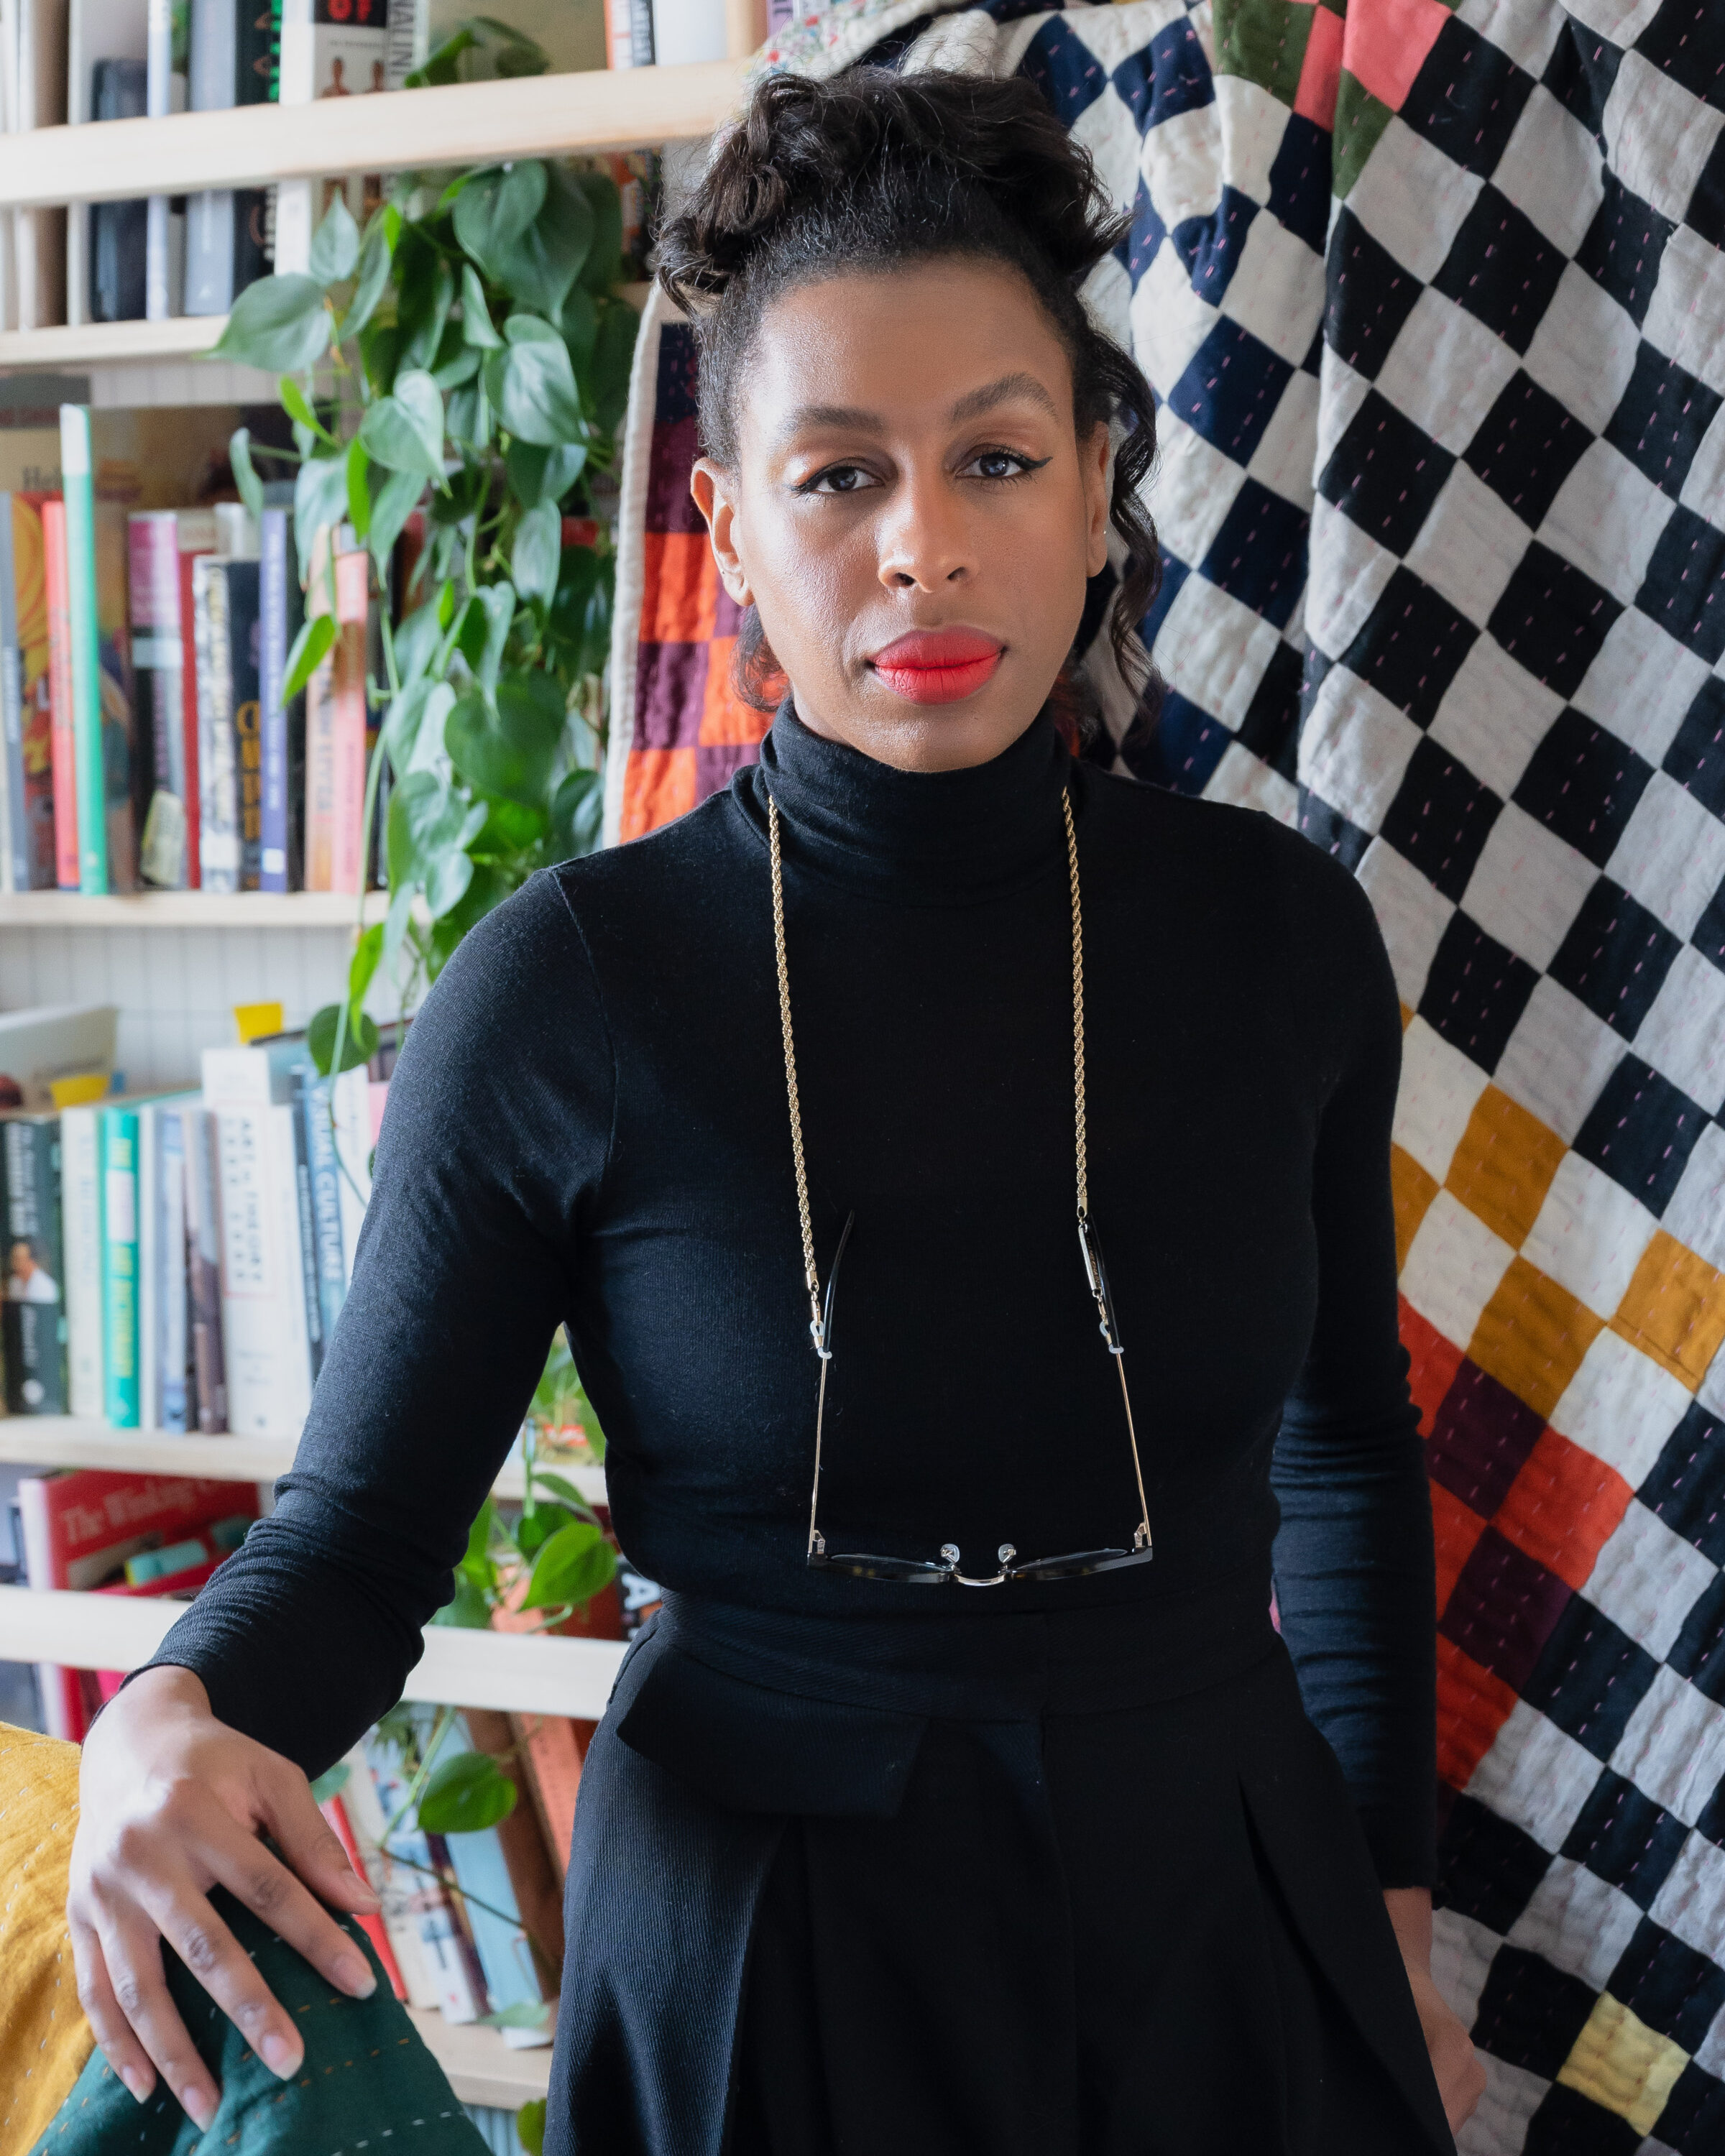 A dark-skinned woman wearing a black turtle neck and skirt stands in front of a colorful checkered quilt, which hangs from a white bookcase. A lush plant is situated among the books. The woman stares at the camera. Her hair is worn atop her head, she has on red liptstick, and wears her glasses around her neck on a thin chain.